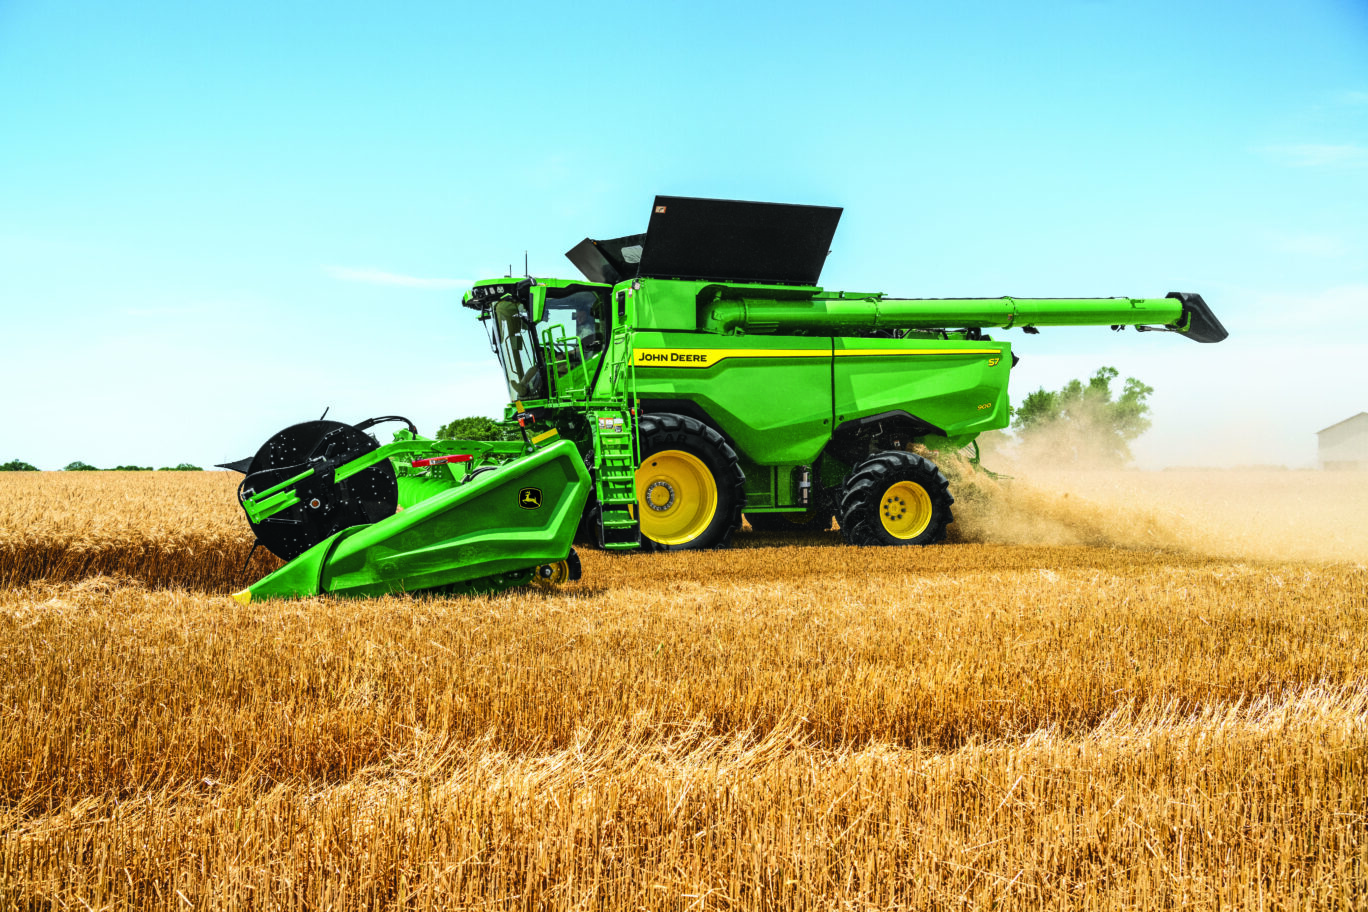 A 2025 S7 harvester working in a crop